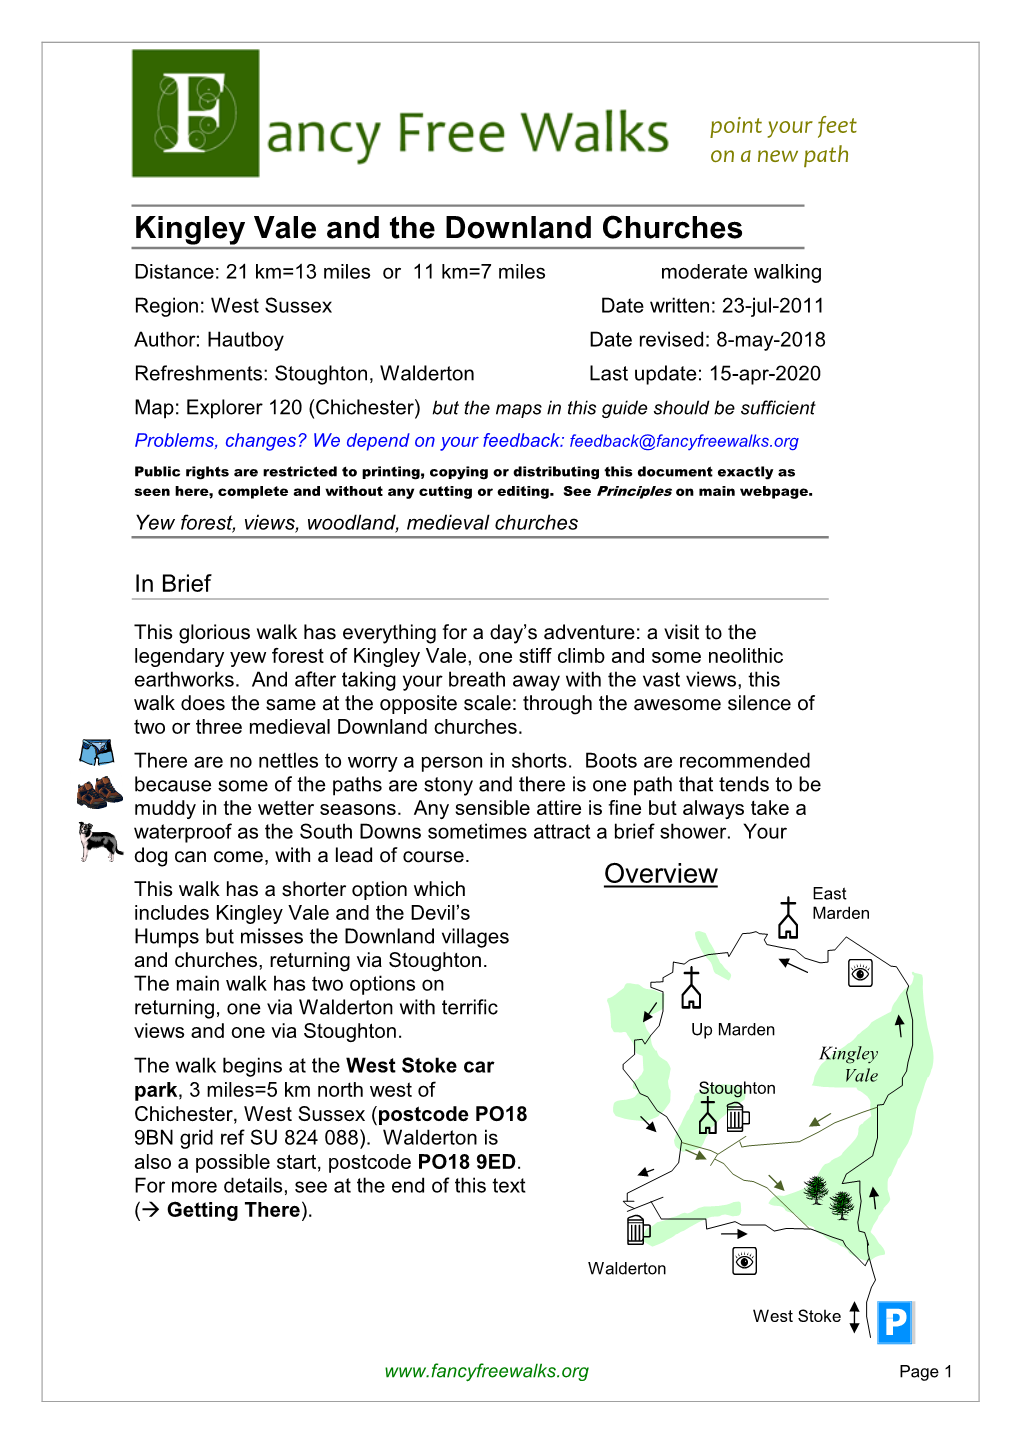 Kingley Vale and the Downland Churches